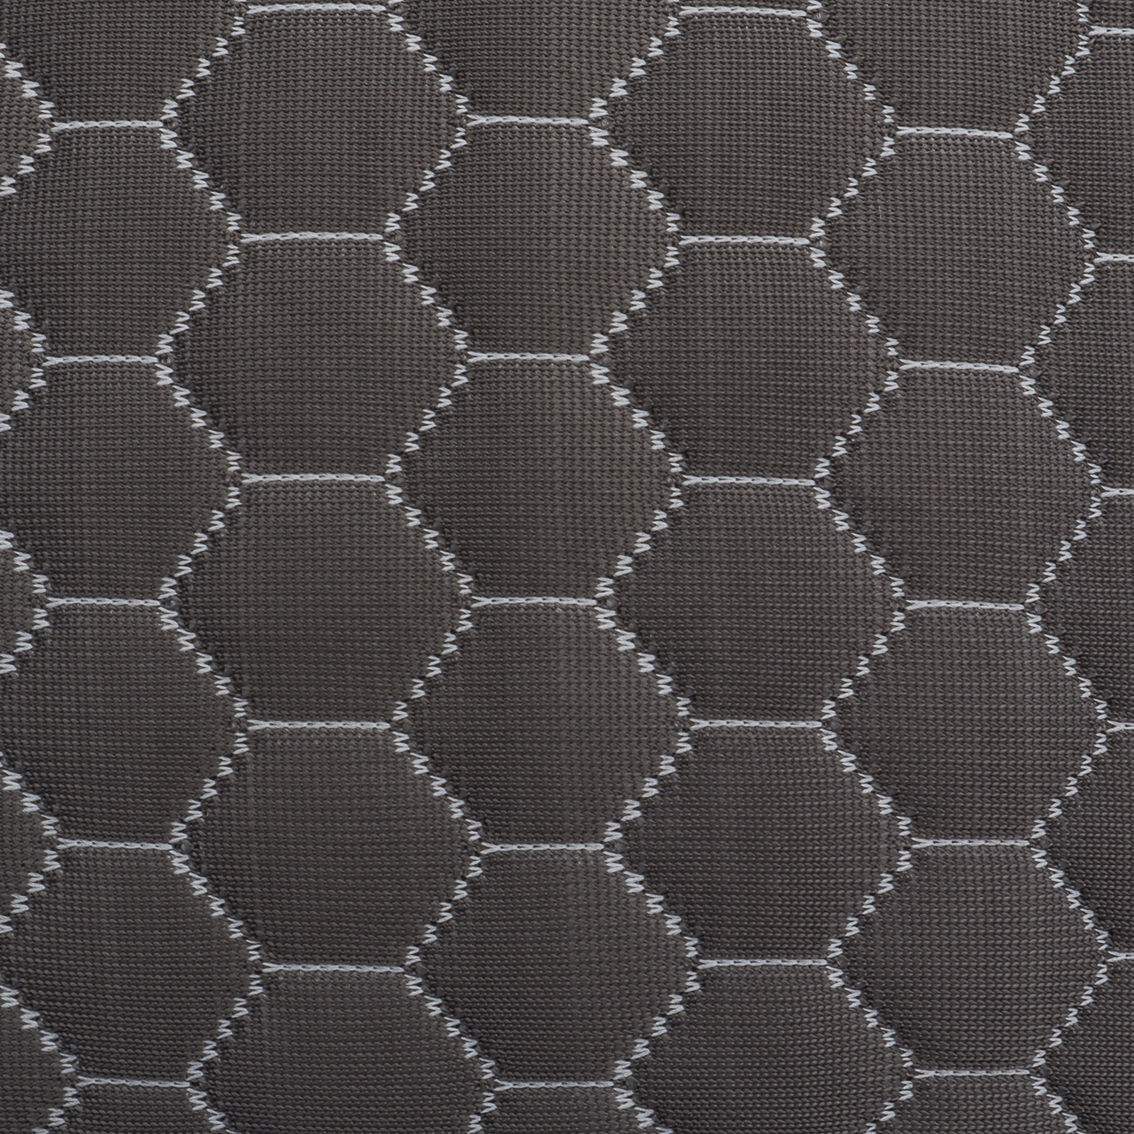 I Love Pillow Out Cold Graphene Contour Pillow - Image 4 of 4